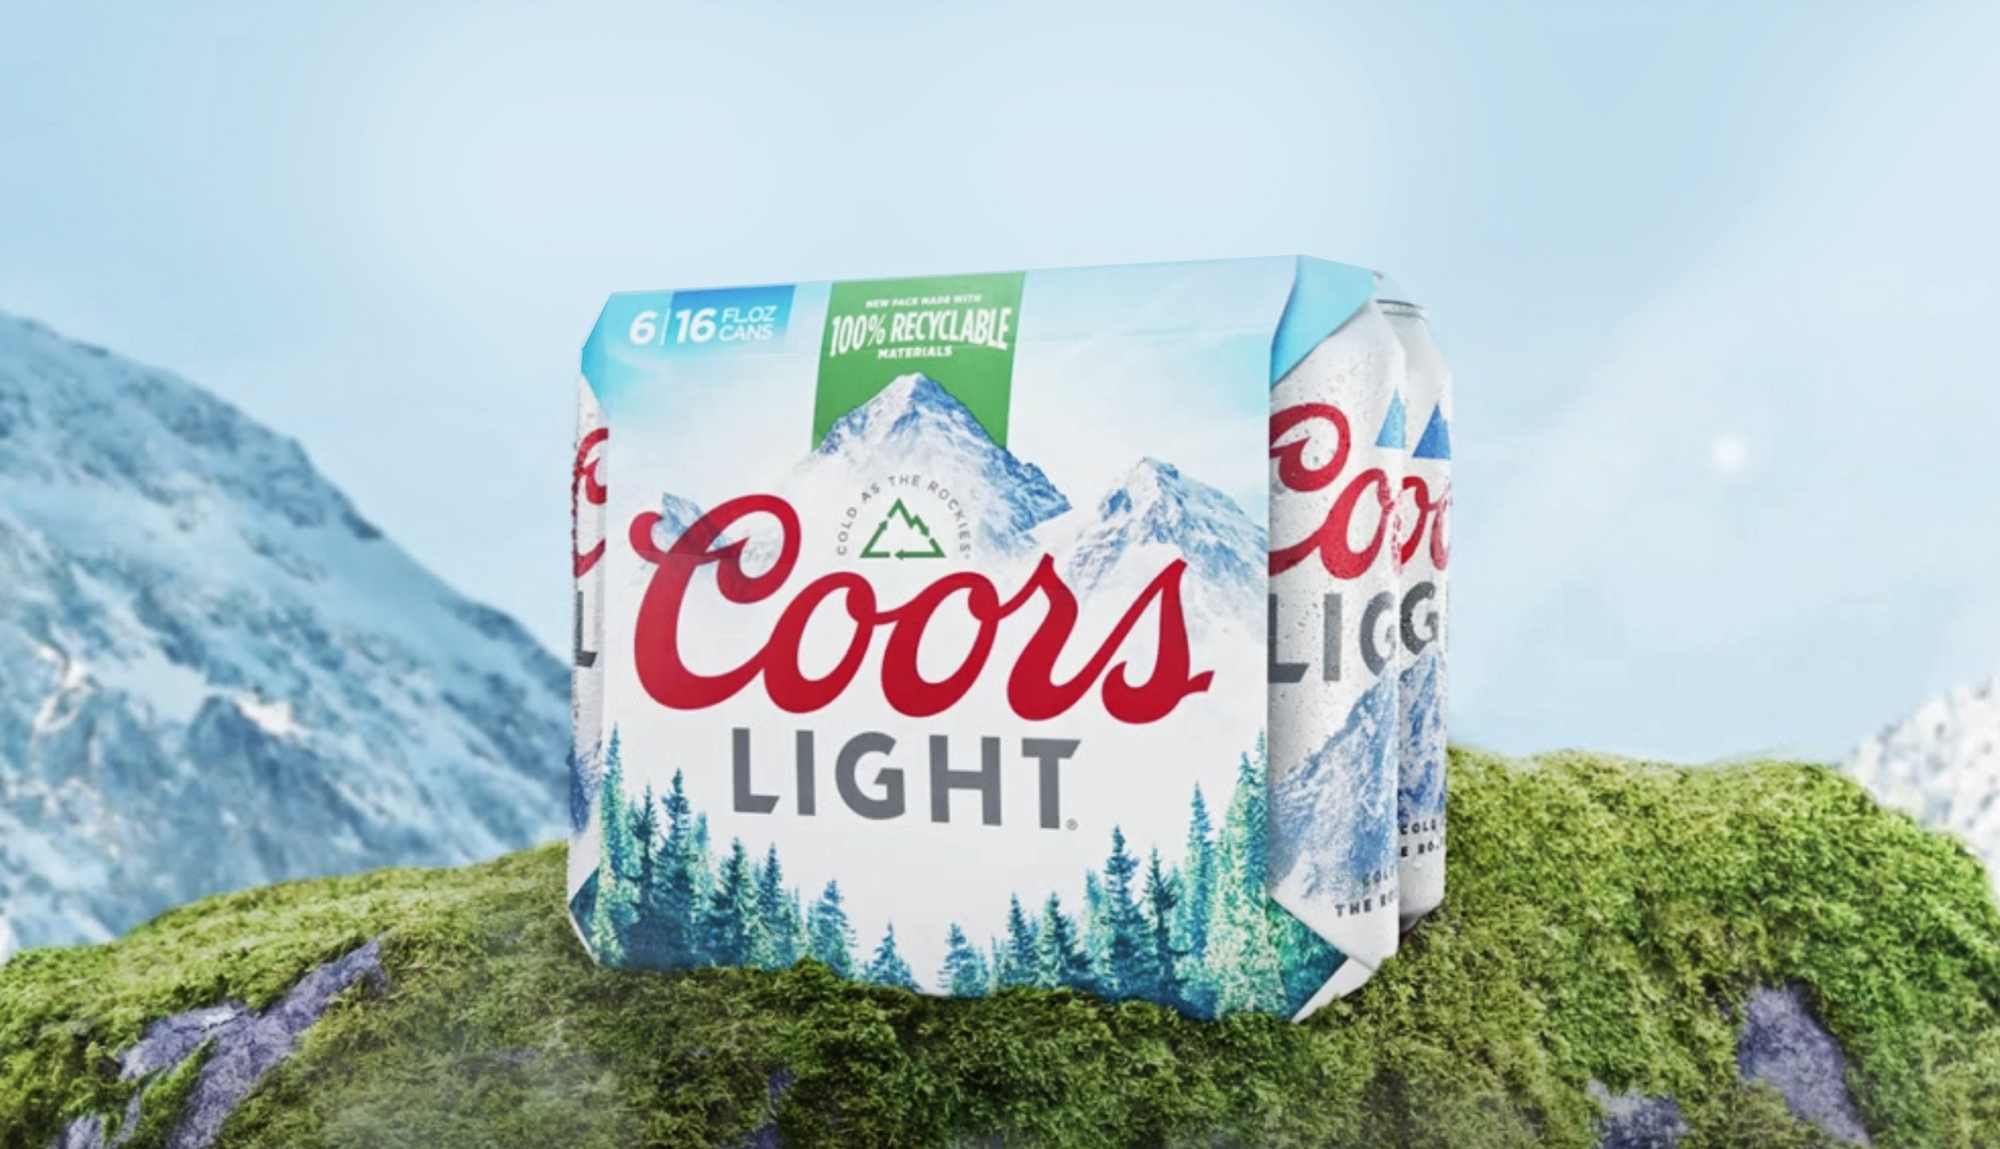 Now all major Coors Light breweries are zero waste-to-landfill, meaning that no matter how much beer they produce, 99.99% of waste is reused or recycled at Coors Light breweries.